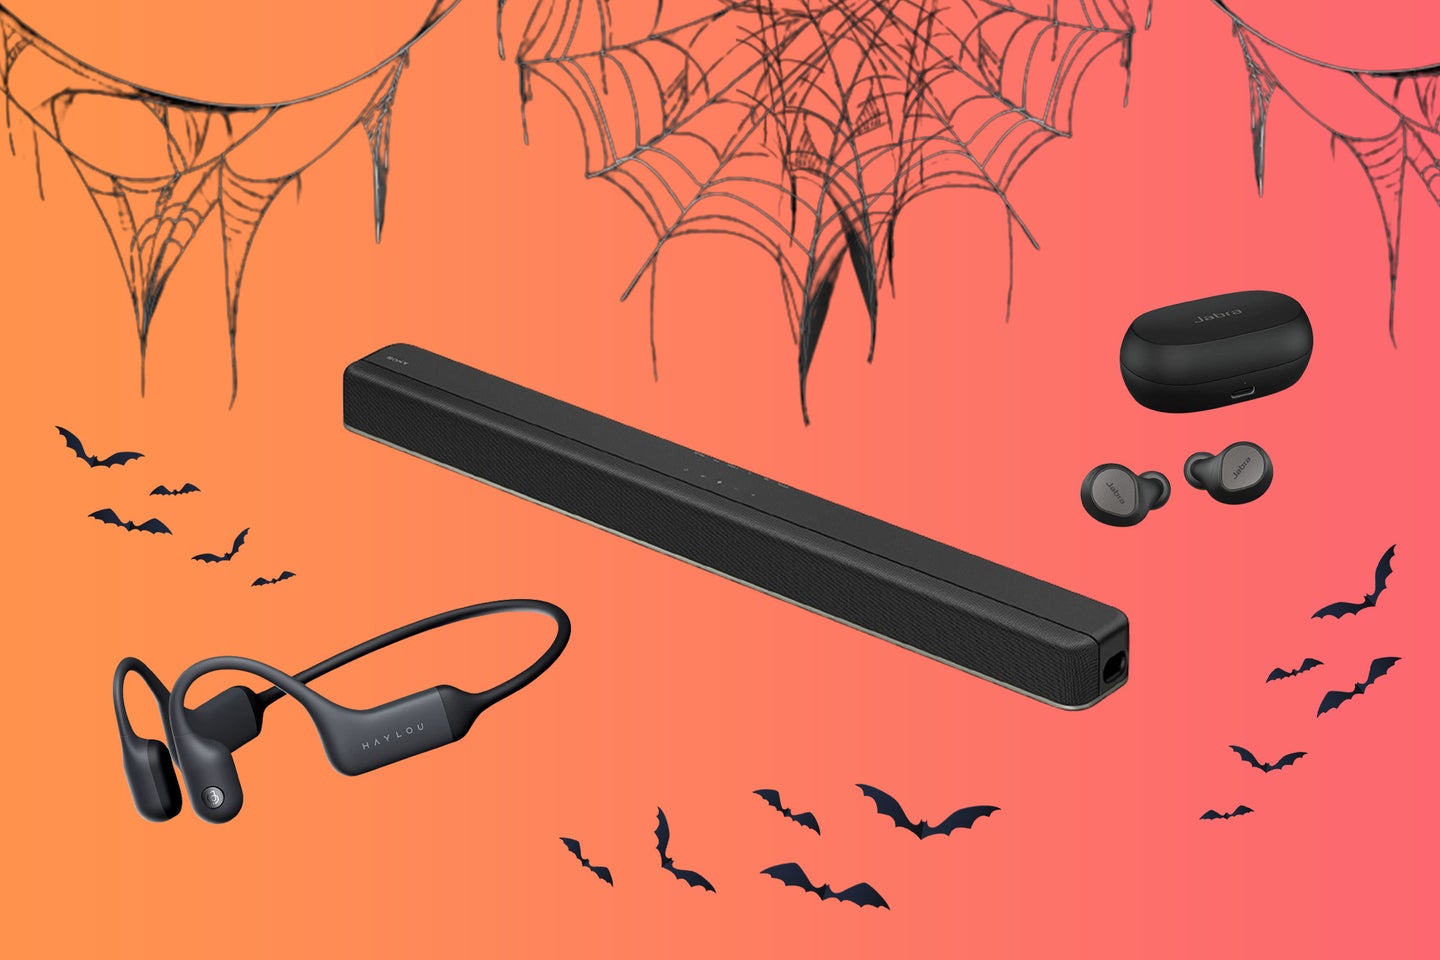 A pair of bone conduction headphones, a soundbar, and a pair of wireless earbuds on an orange background with spiderwebs and small bats